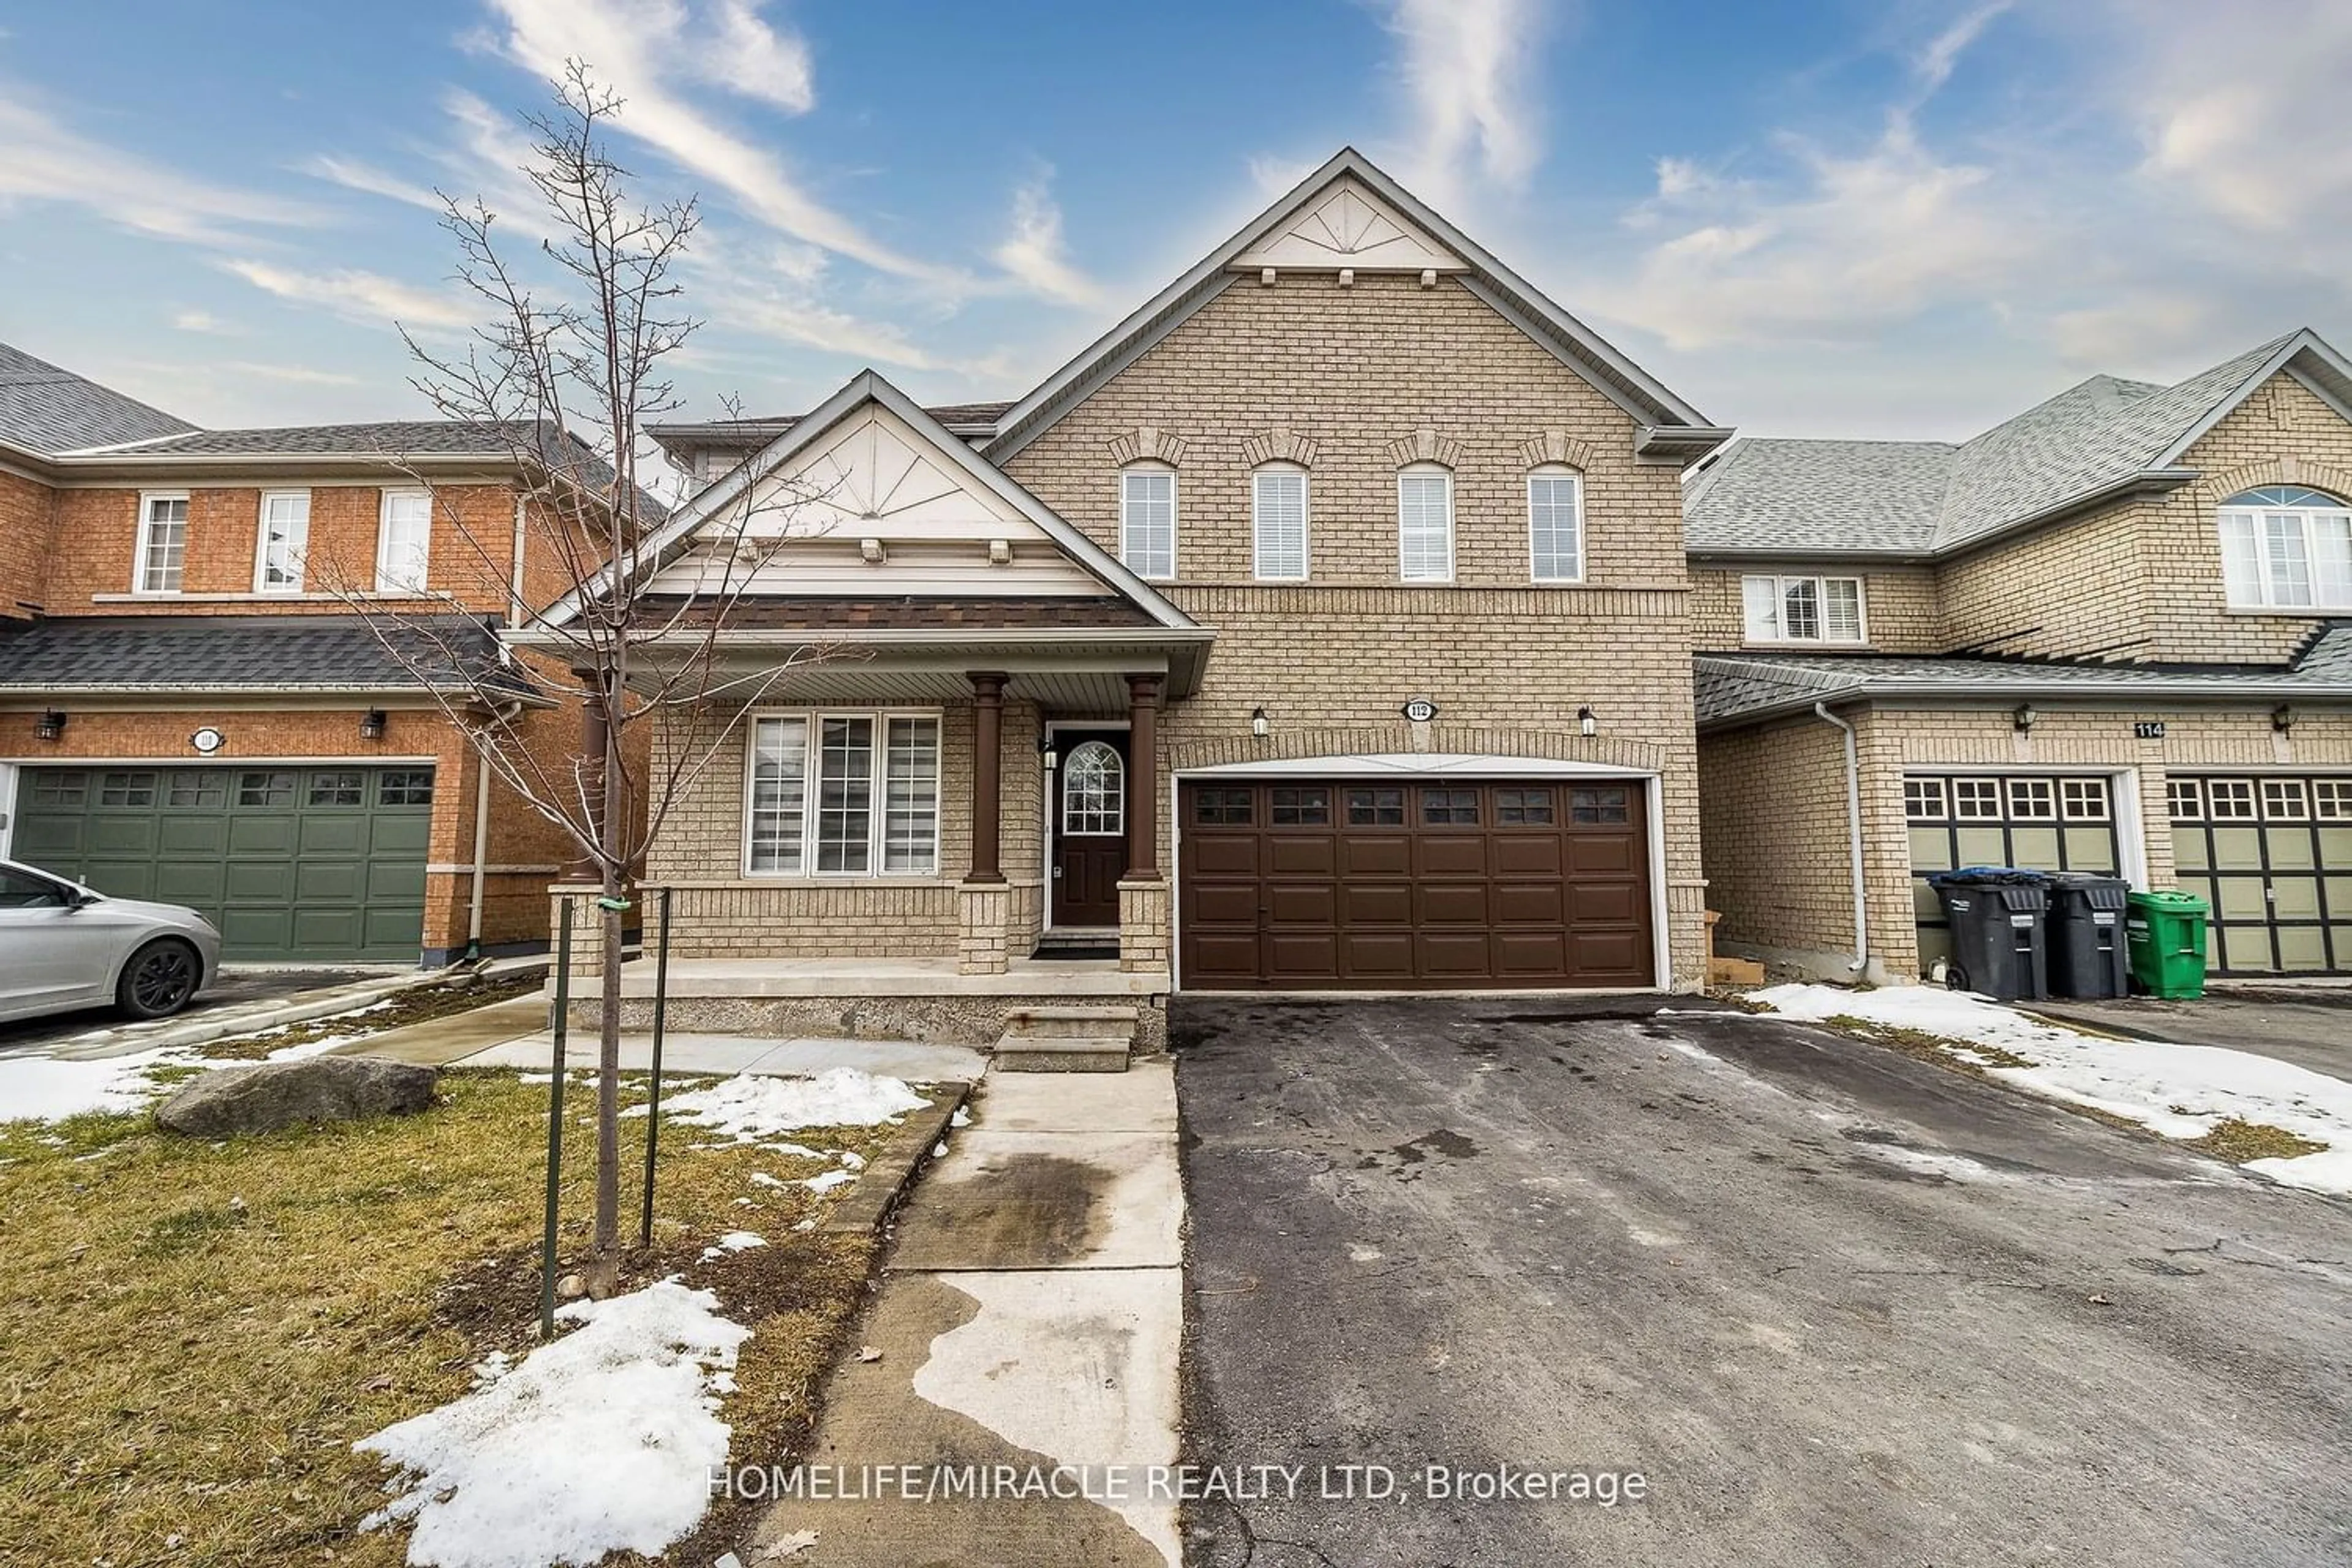 Frontside or backside of a home for 112 Brisdale Dr, Brampton Ontario L7A 2H2